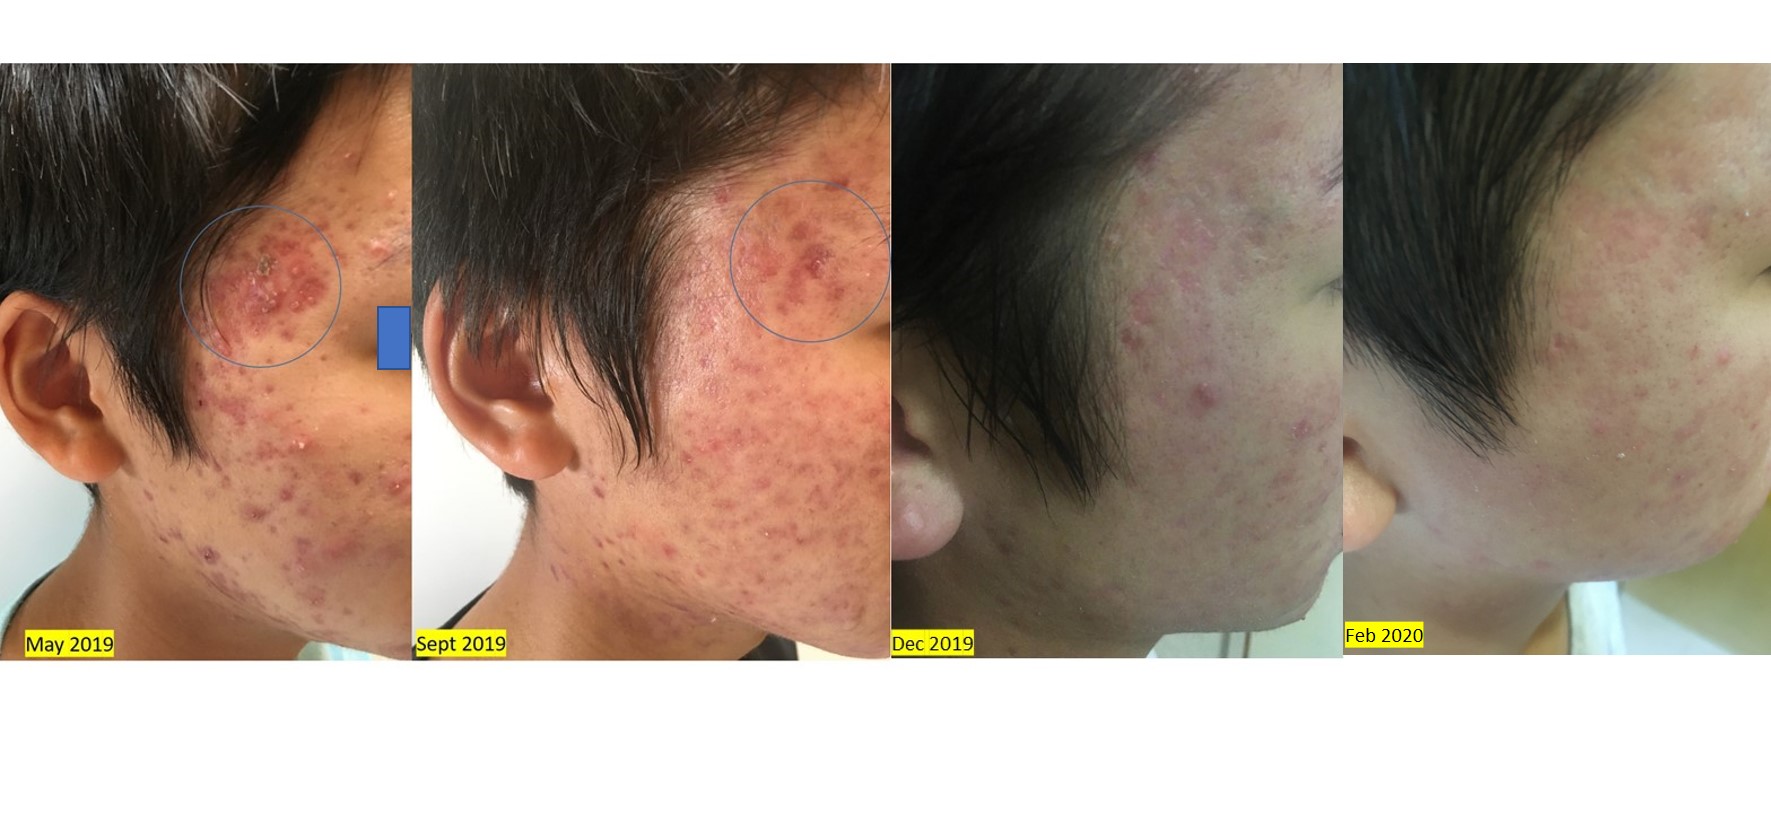 Severe childhood acne unresponsive to "standard" medical treatments shows significant improvement after 9 months' wheatgrass extract application.